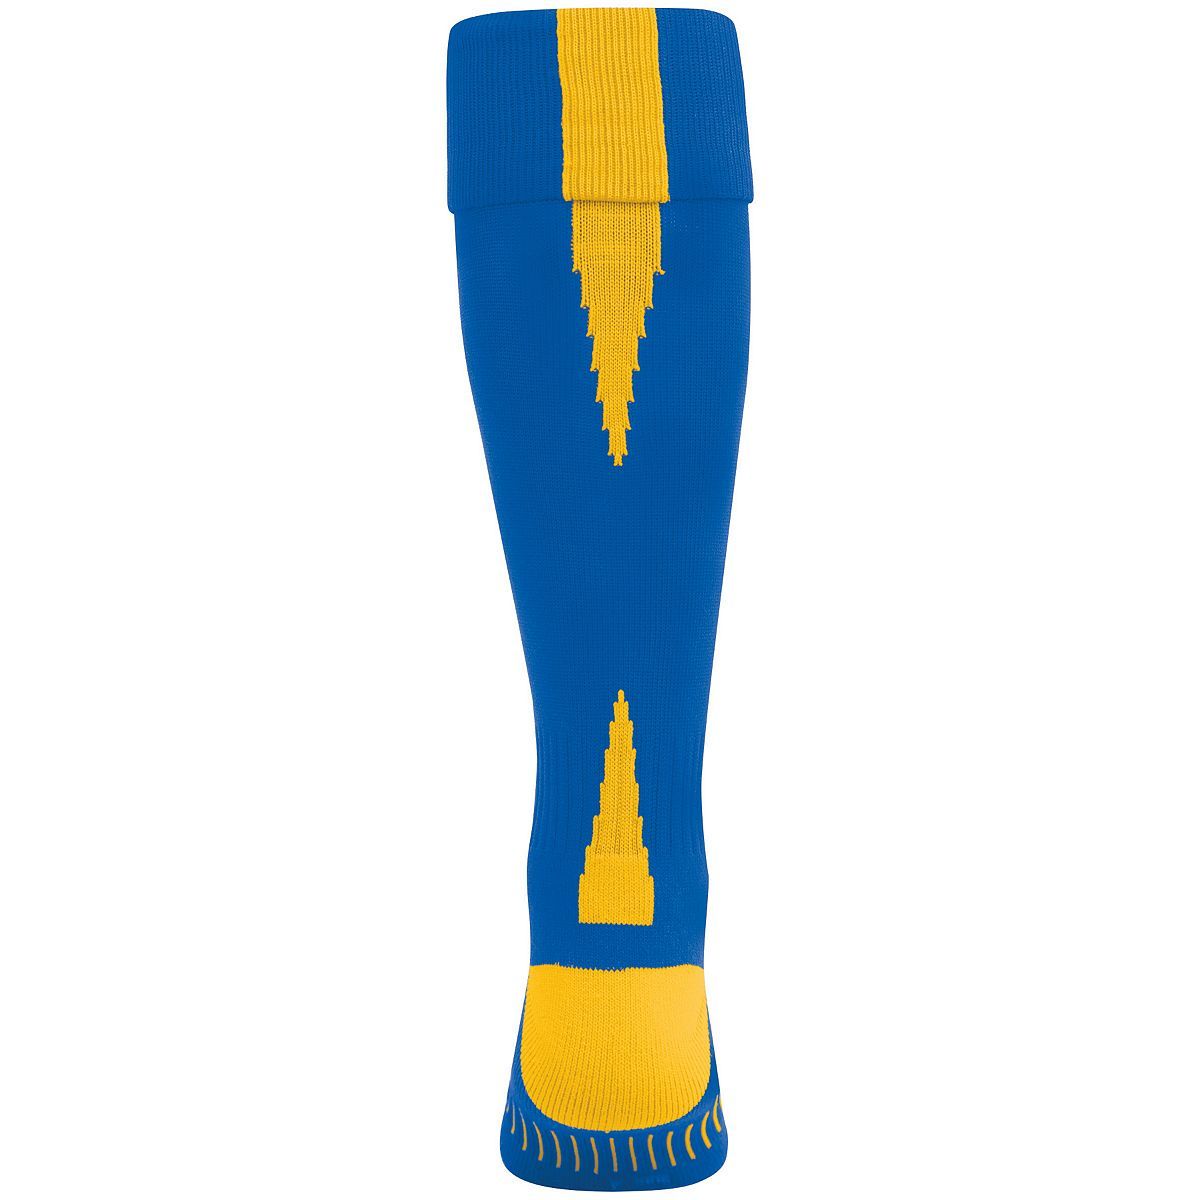 High 5 Performance Sock in Royal/Athletic Gold  -Part of the Accessories, High5-Products, Accessories-Socks product lines at KanaleyCreations.com